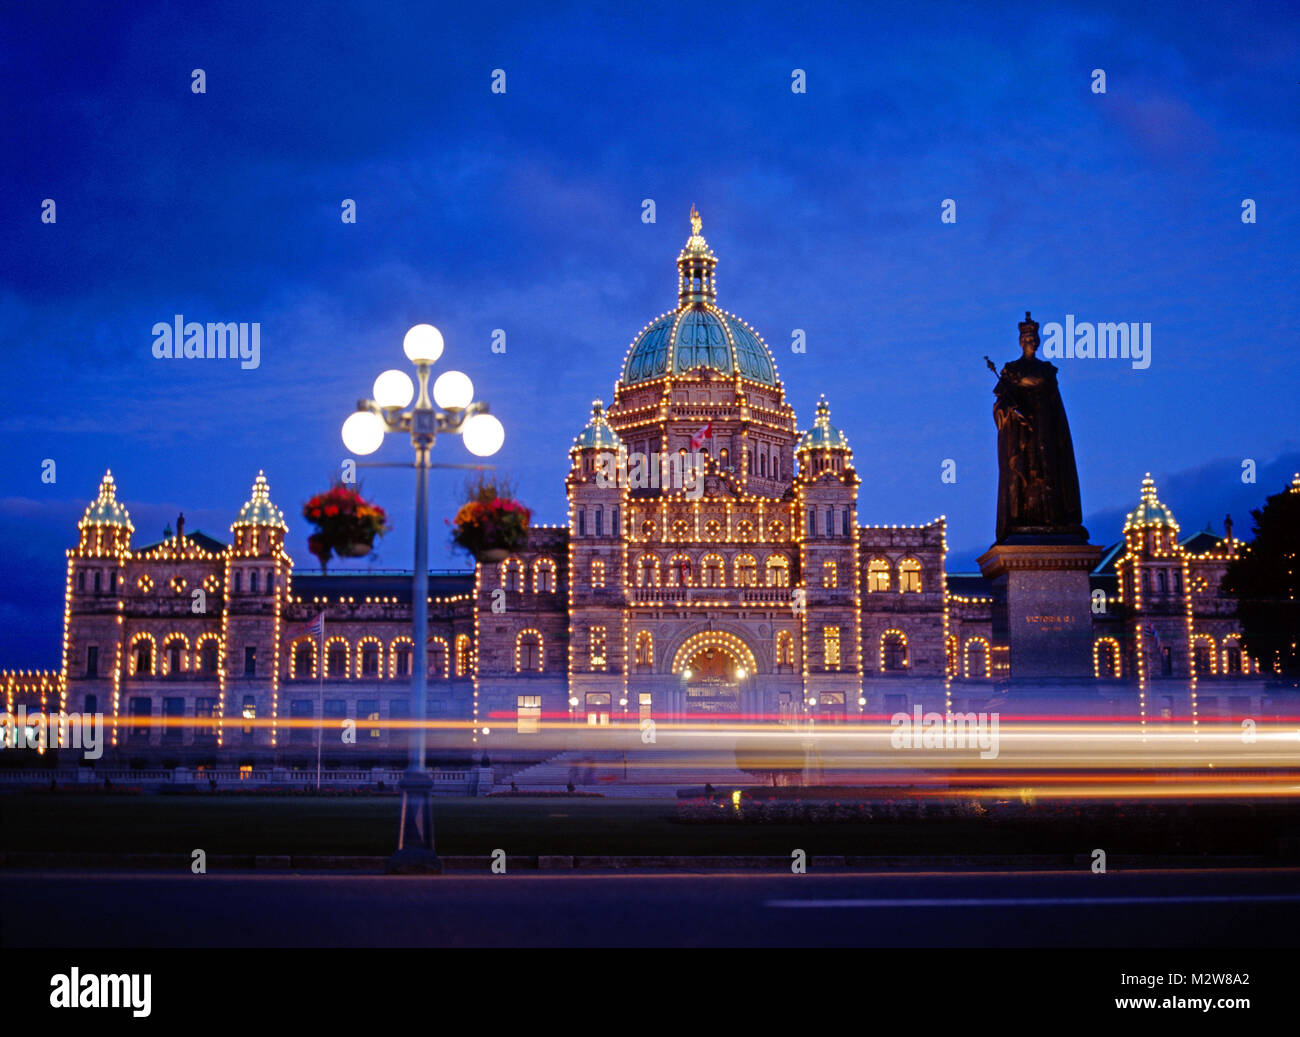 Every evening with more than 3500 light bulbs is illuminated the parliament building established in 1898 in the empire style in Victoria, the capital of the Canadian province British Columbia on Vancouver Iceland Stock Photo